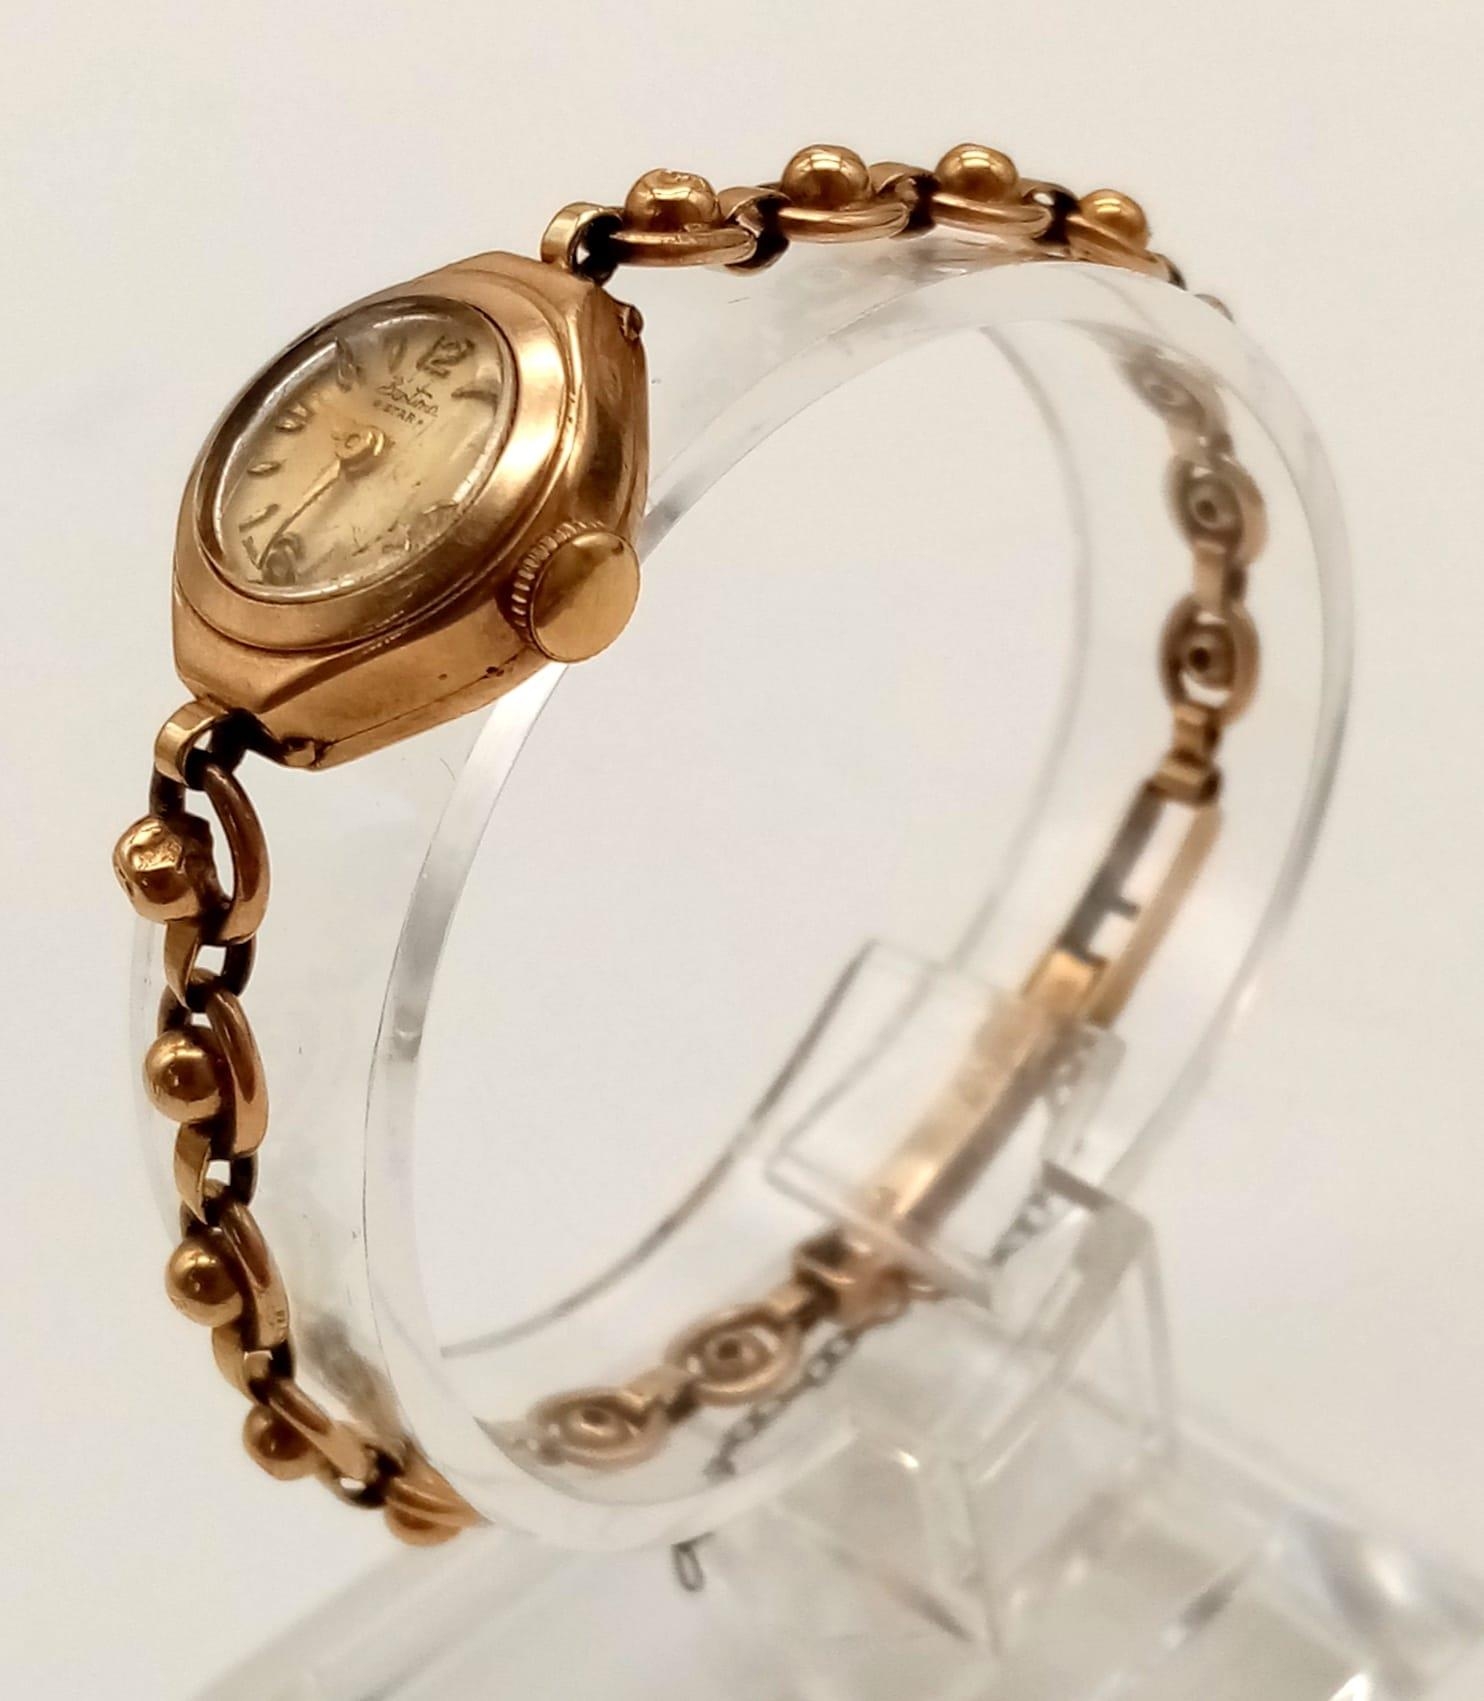 A Vintage 9K Gold Bentima Ladies Watch. 9k gold bracelet and case - 15mm. Mechanical movement - A/F. - Image 2 of 6